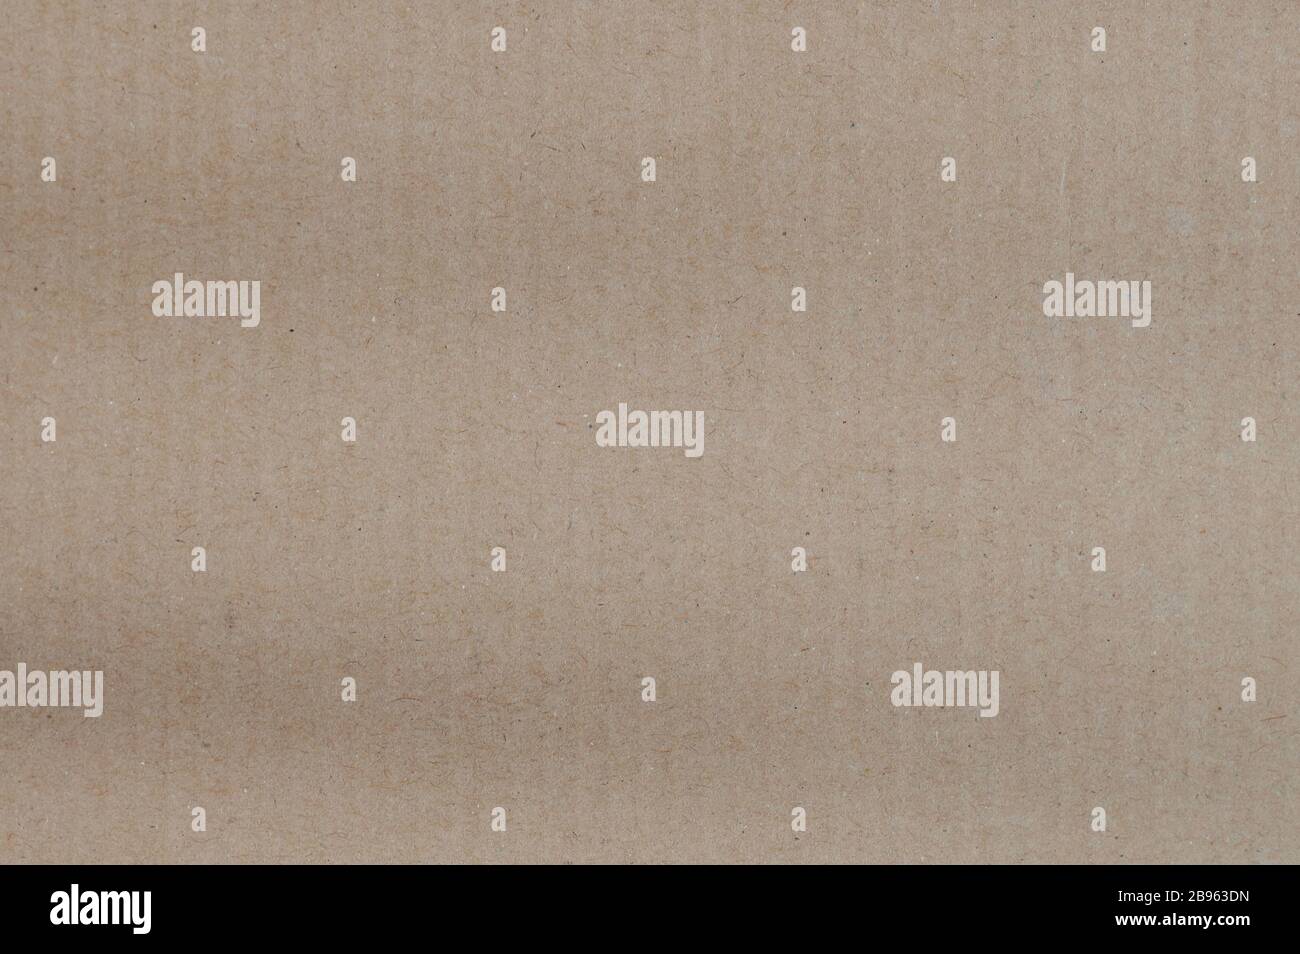 Brown cardboard paper texture background macro close up view Stock Photo